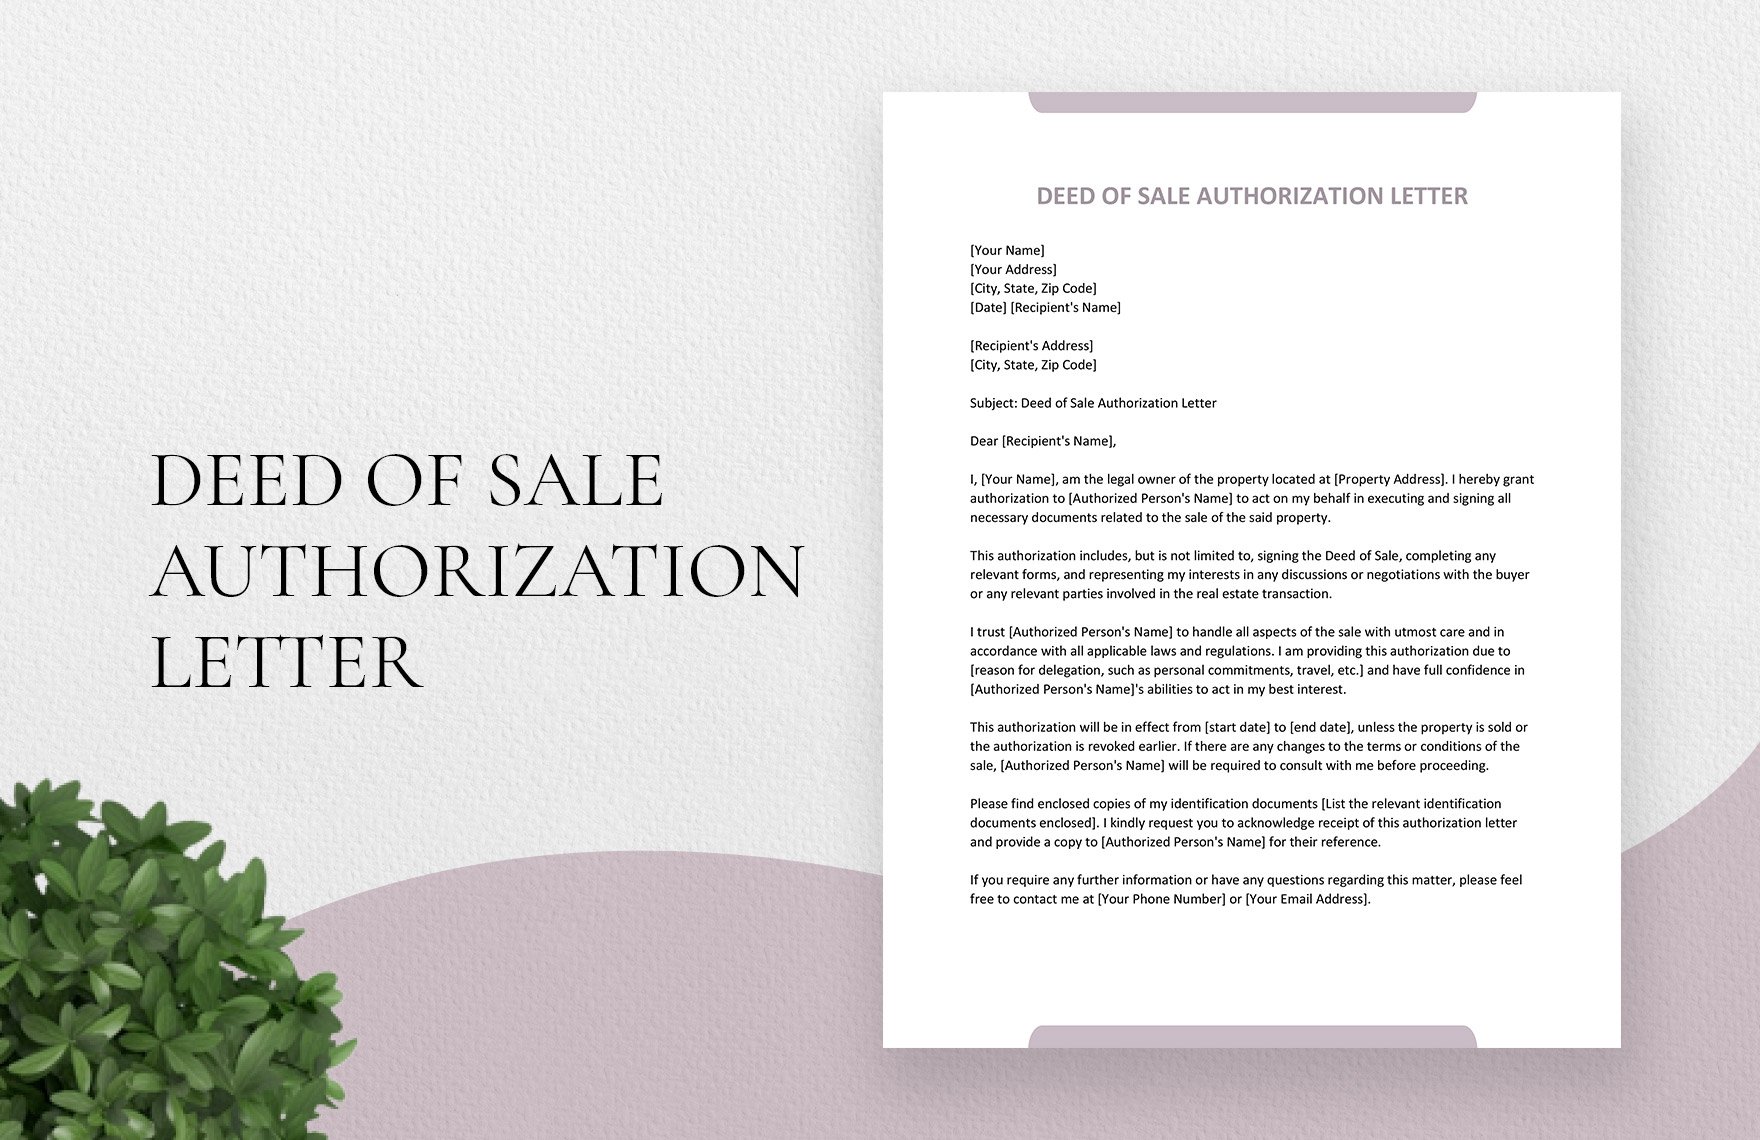 Deed of Sale Authorization Letter